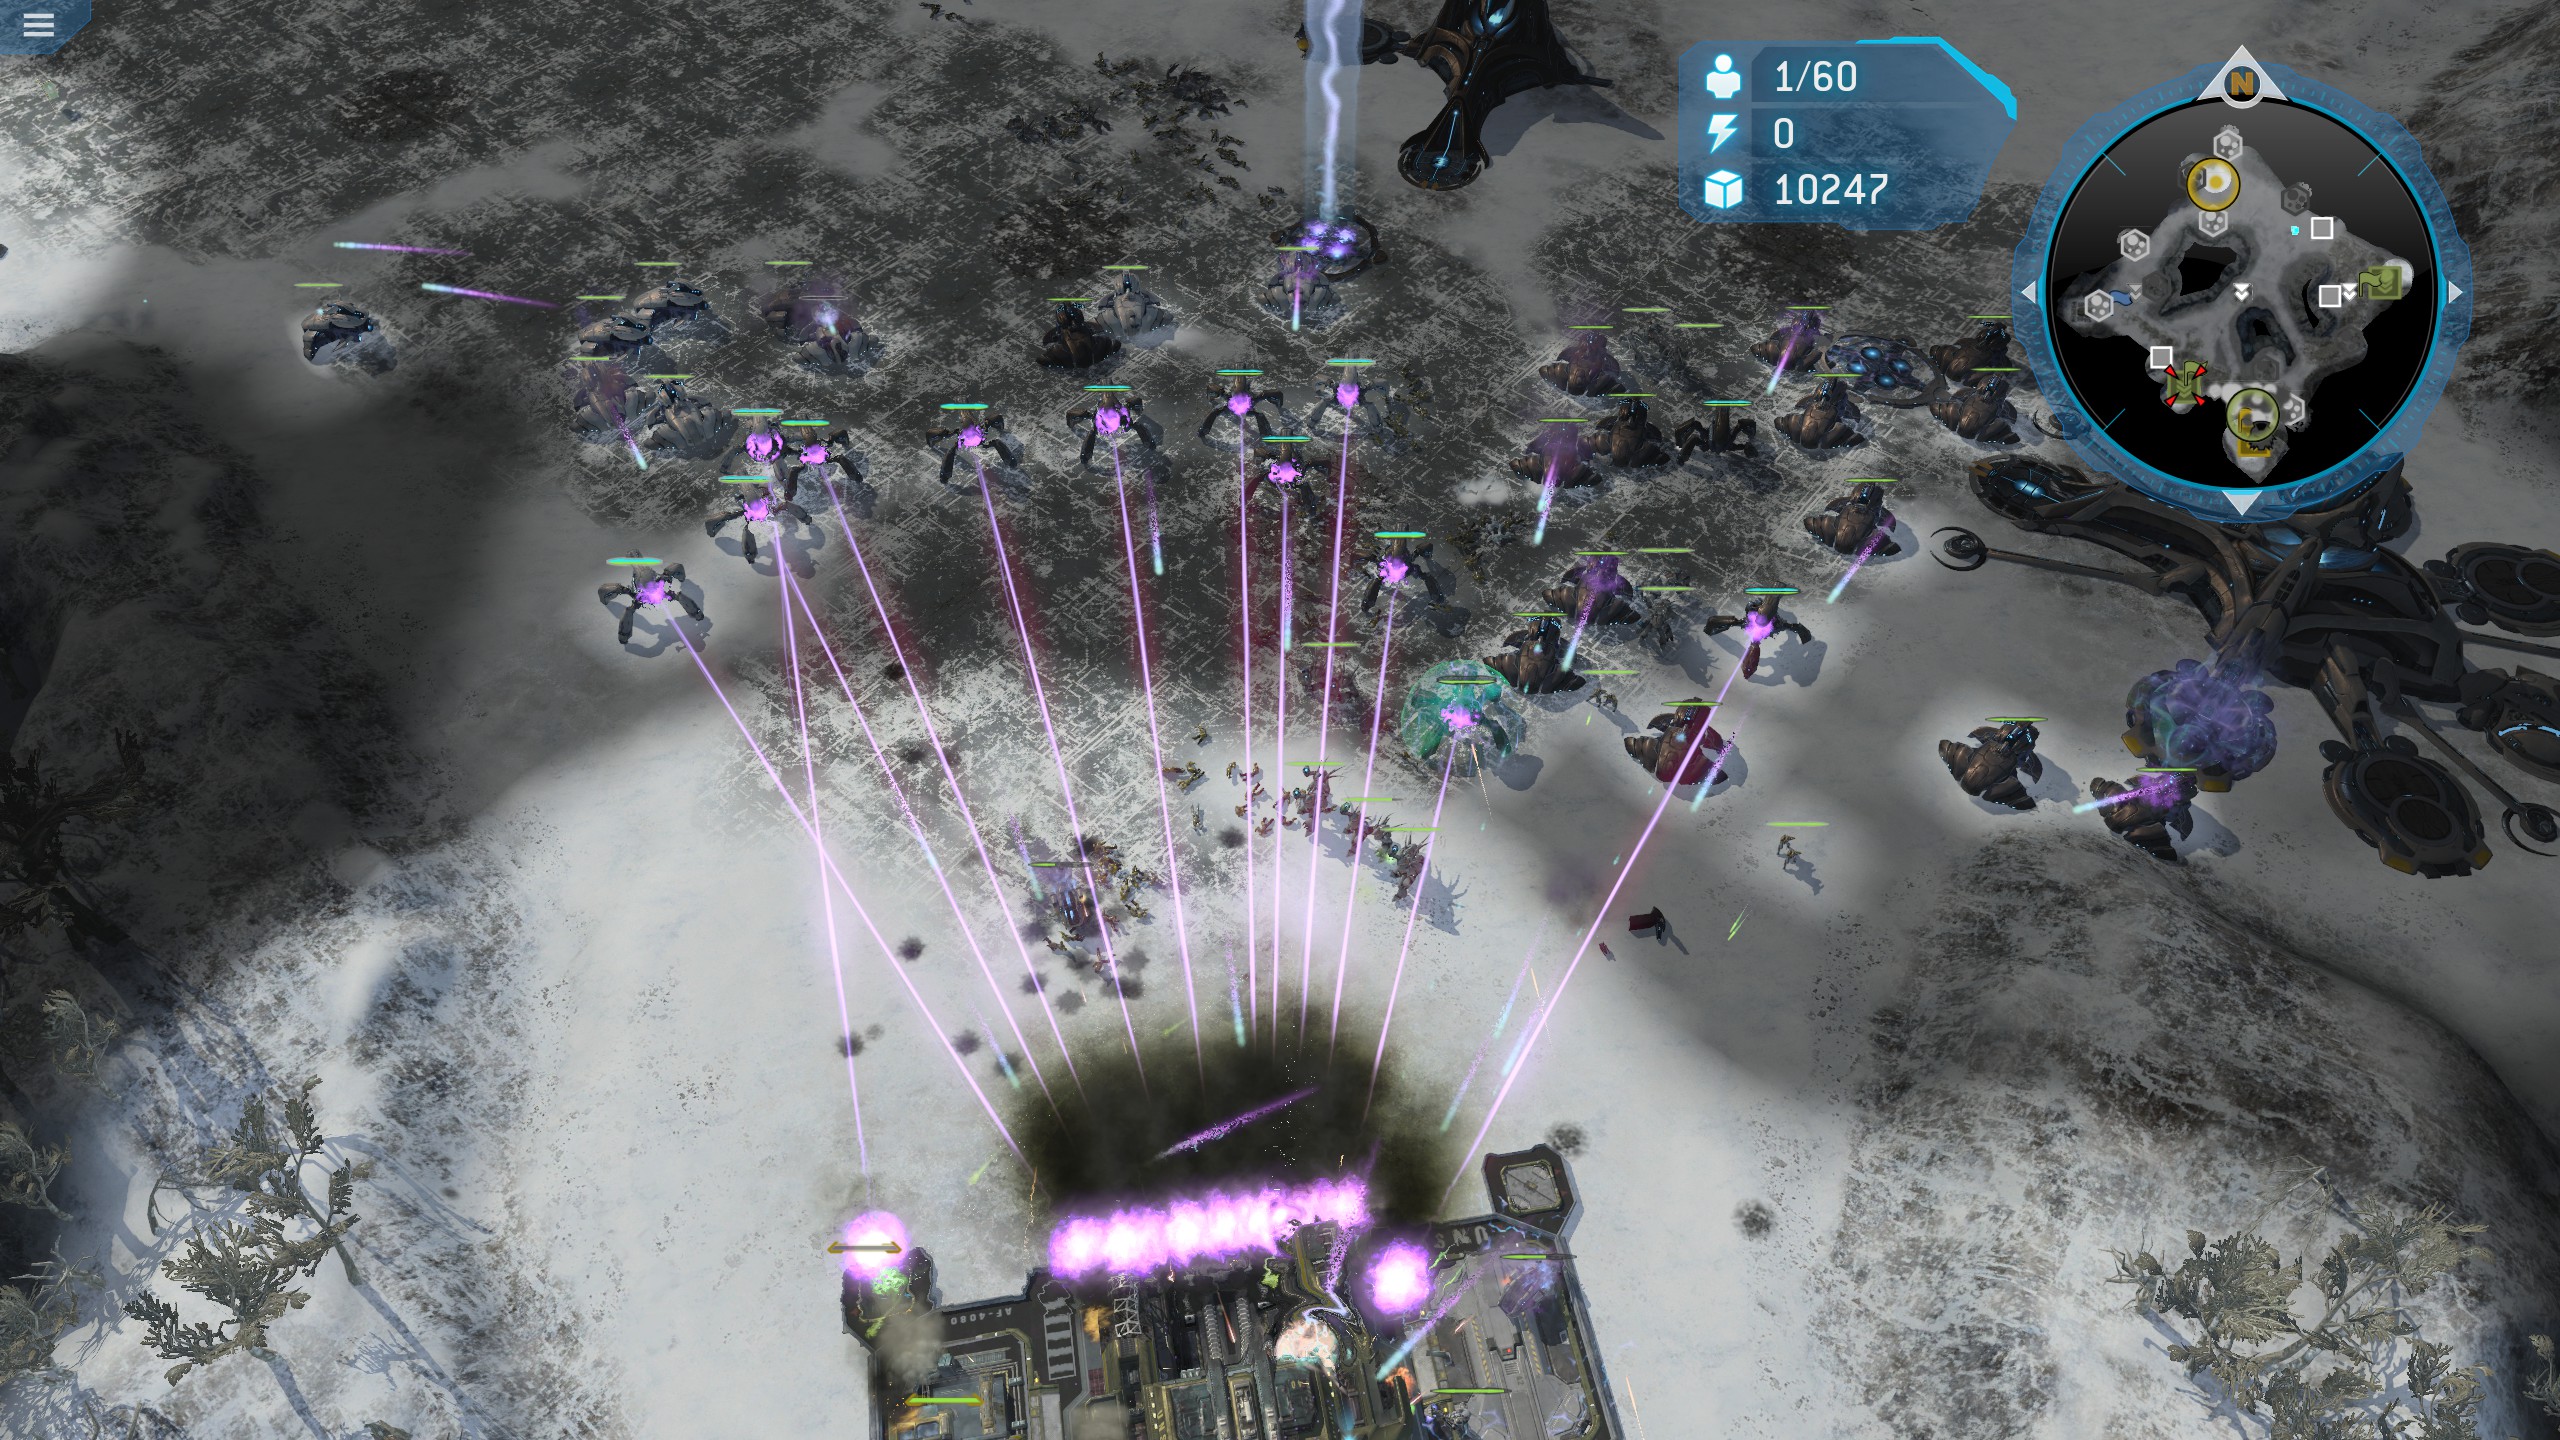 Halo Wars: Definitive Edition - Hardcore Mod Guide and Tips in 2021.